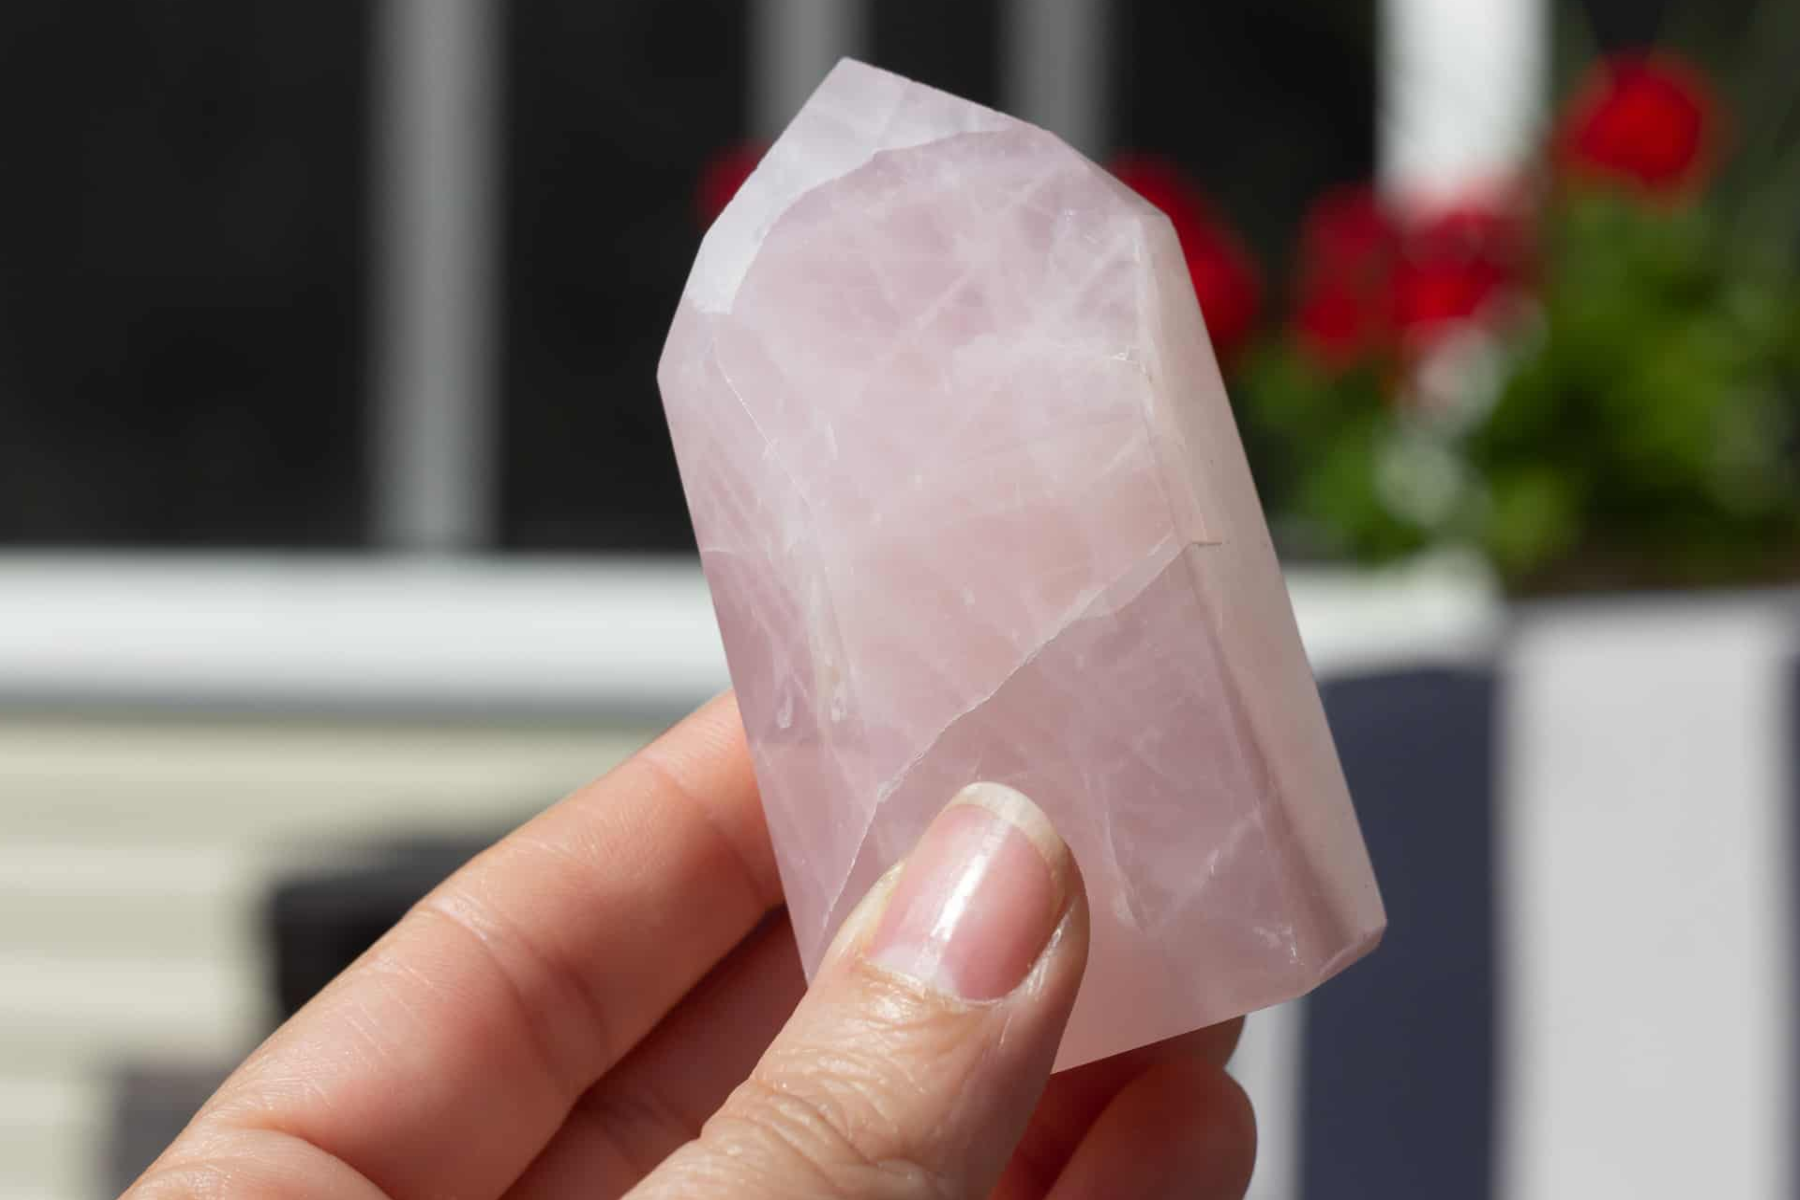 A hand of a woman holding a sphere-shaped Rose Quartz